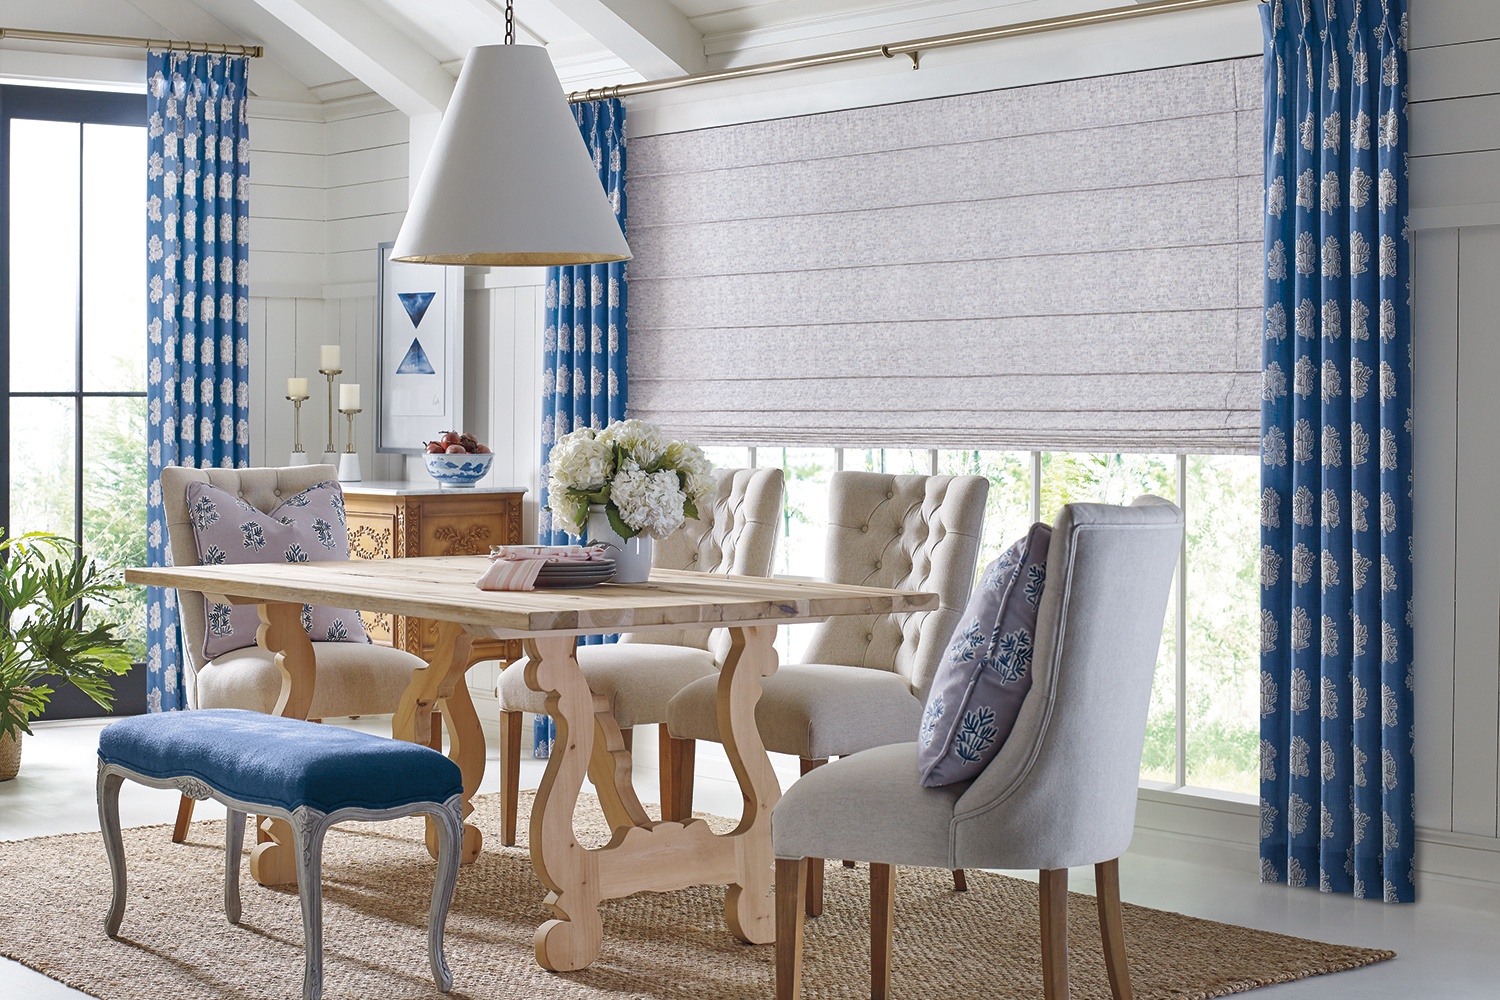 5 Home Decor Trends For 2021, Living Room Window Treatments 2021